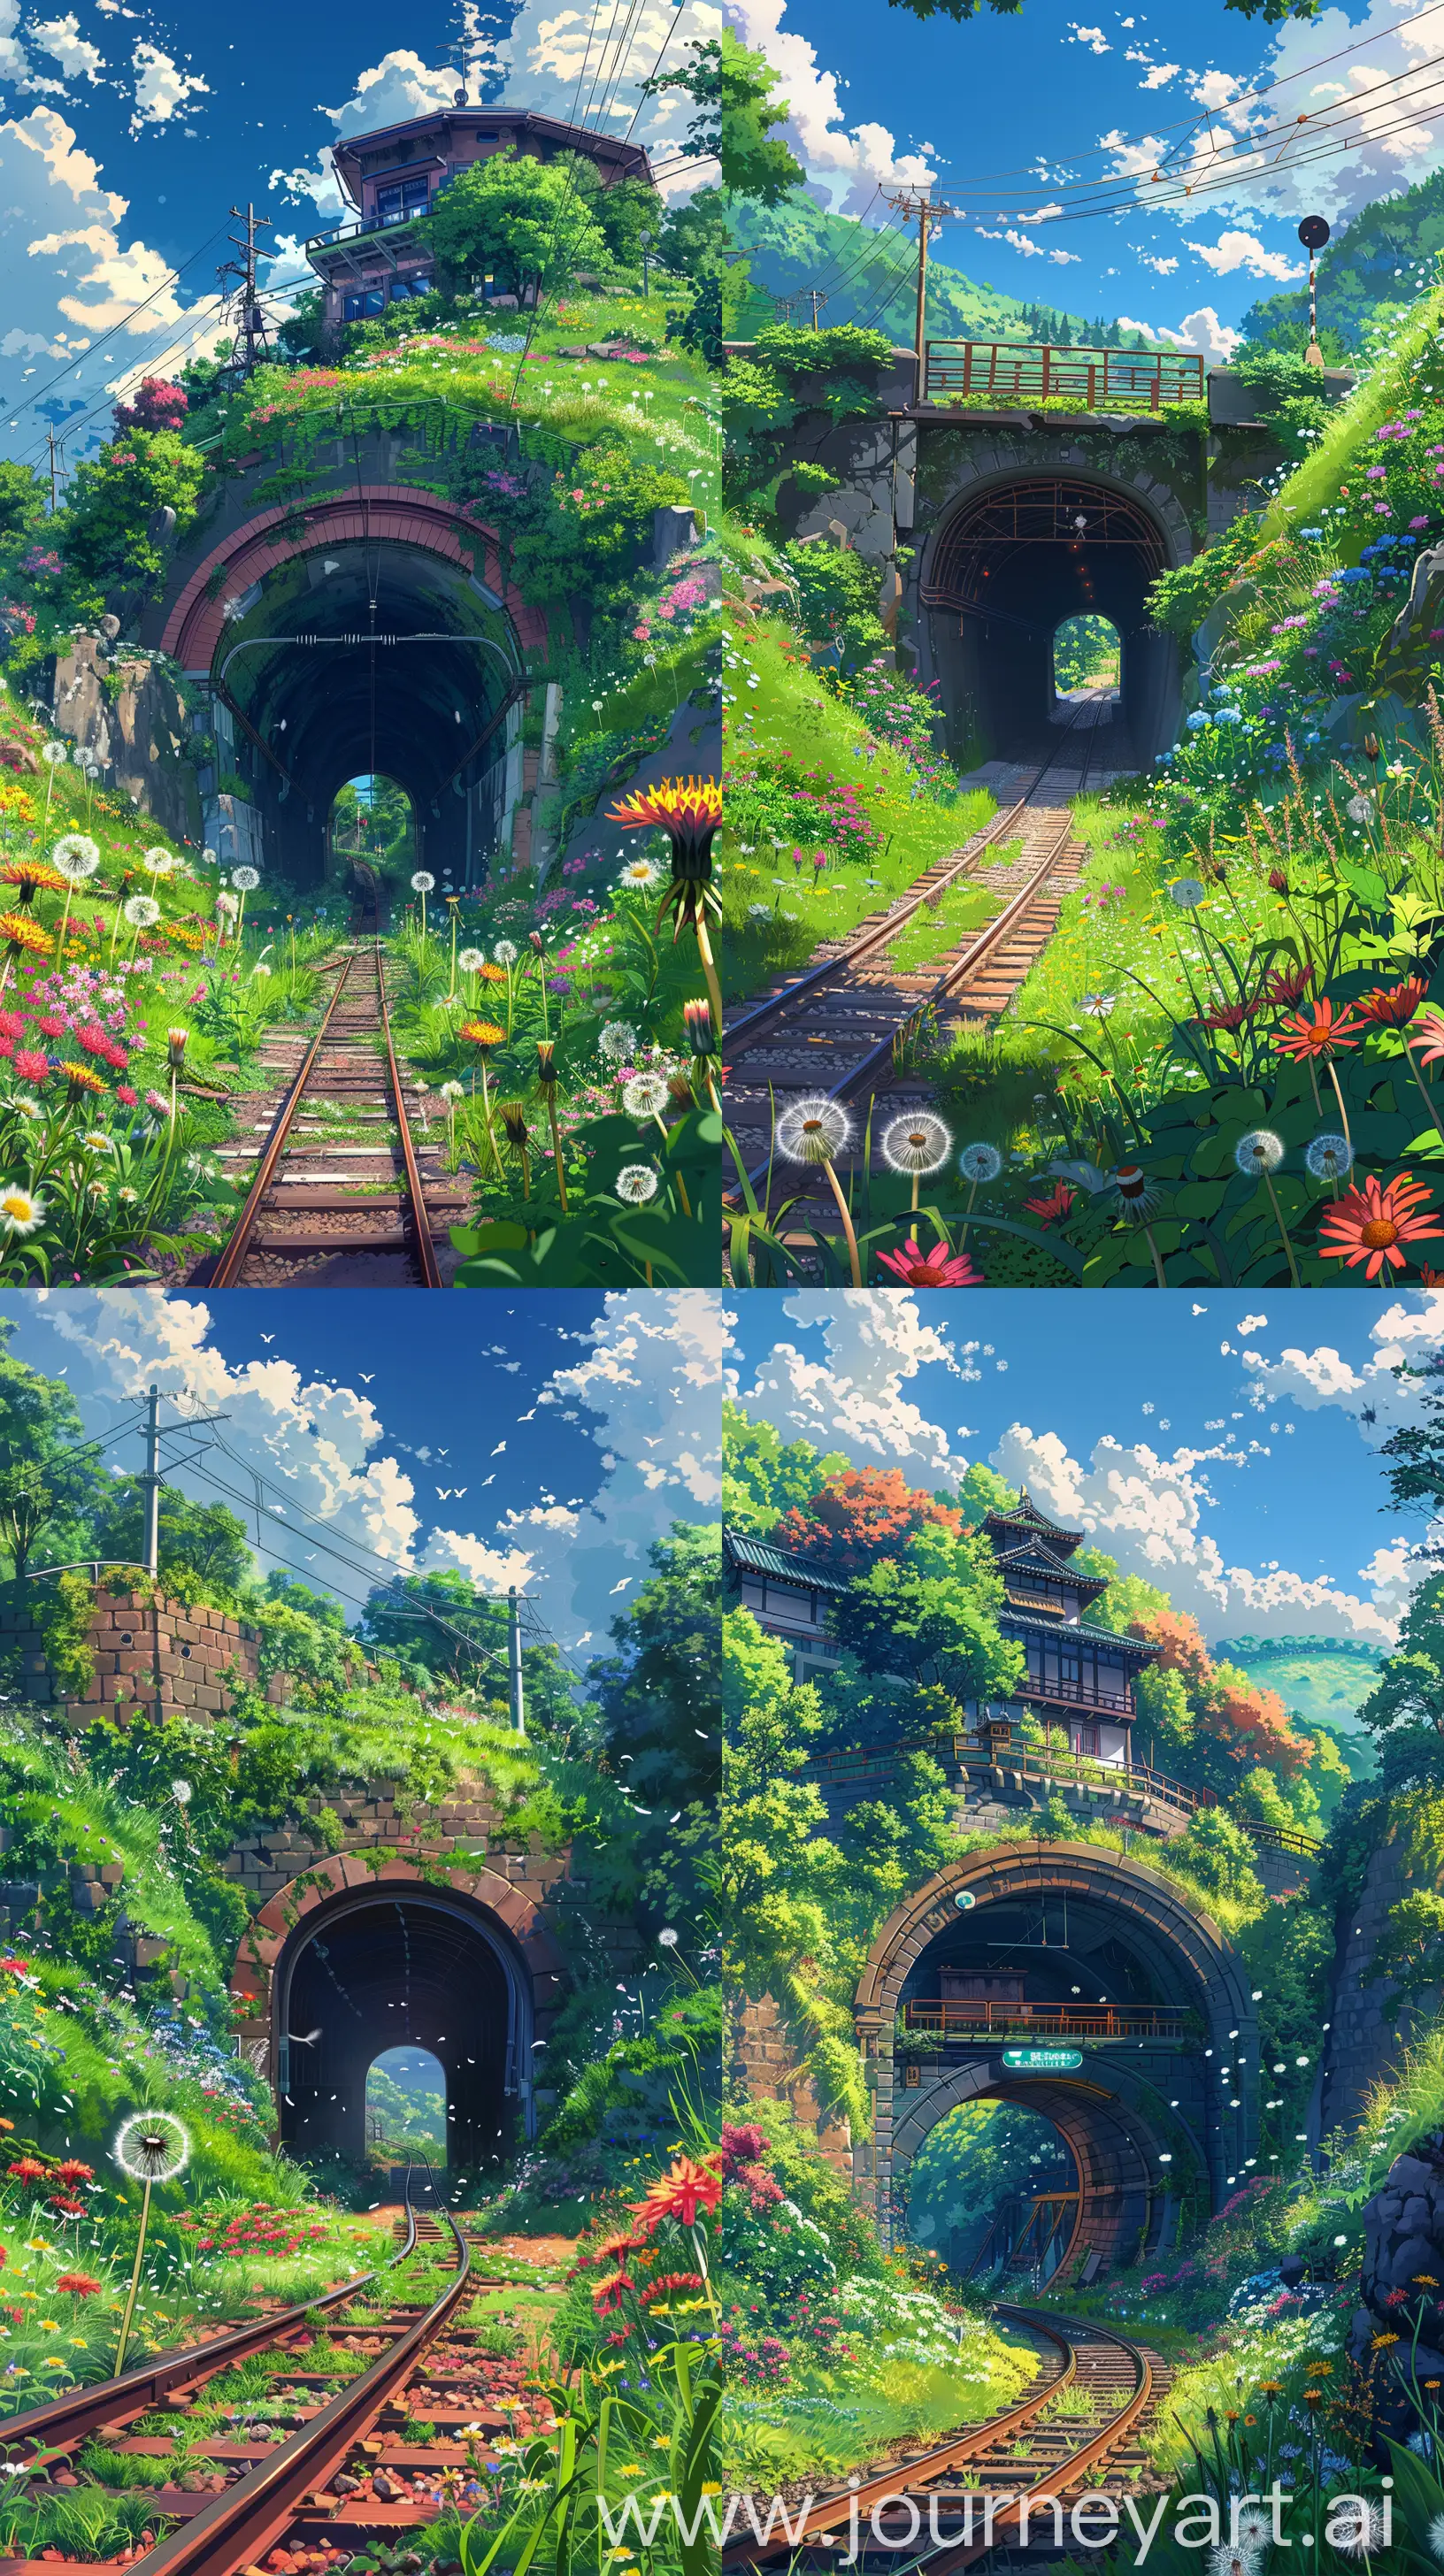 Beautiful anime scenary, illustration, mokoto shinkai and Ghibli style mix, direct front facade view of rail tunnel, beautiful colorful wild flowers, dandelion, grass, small bridge over tunnel, train track, beautiful sky, spring time, anime scenary, ultra hd, High quality, sharp details, no hyperrealistic --ar 9:16 --s 500